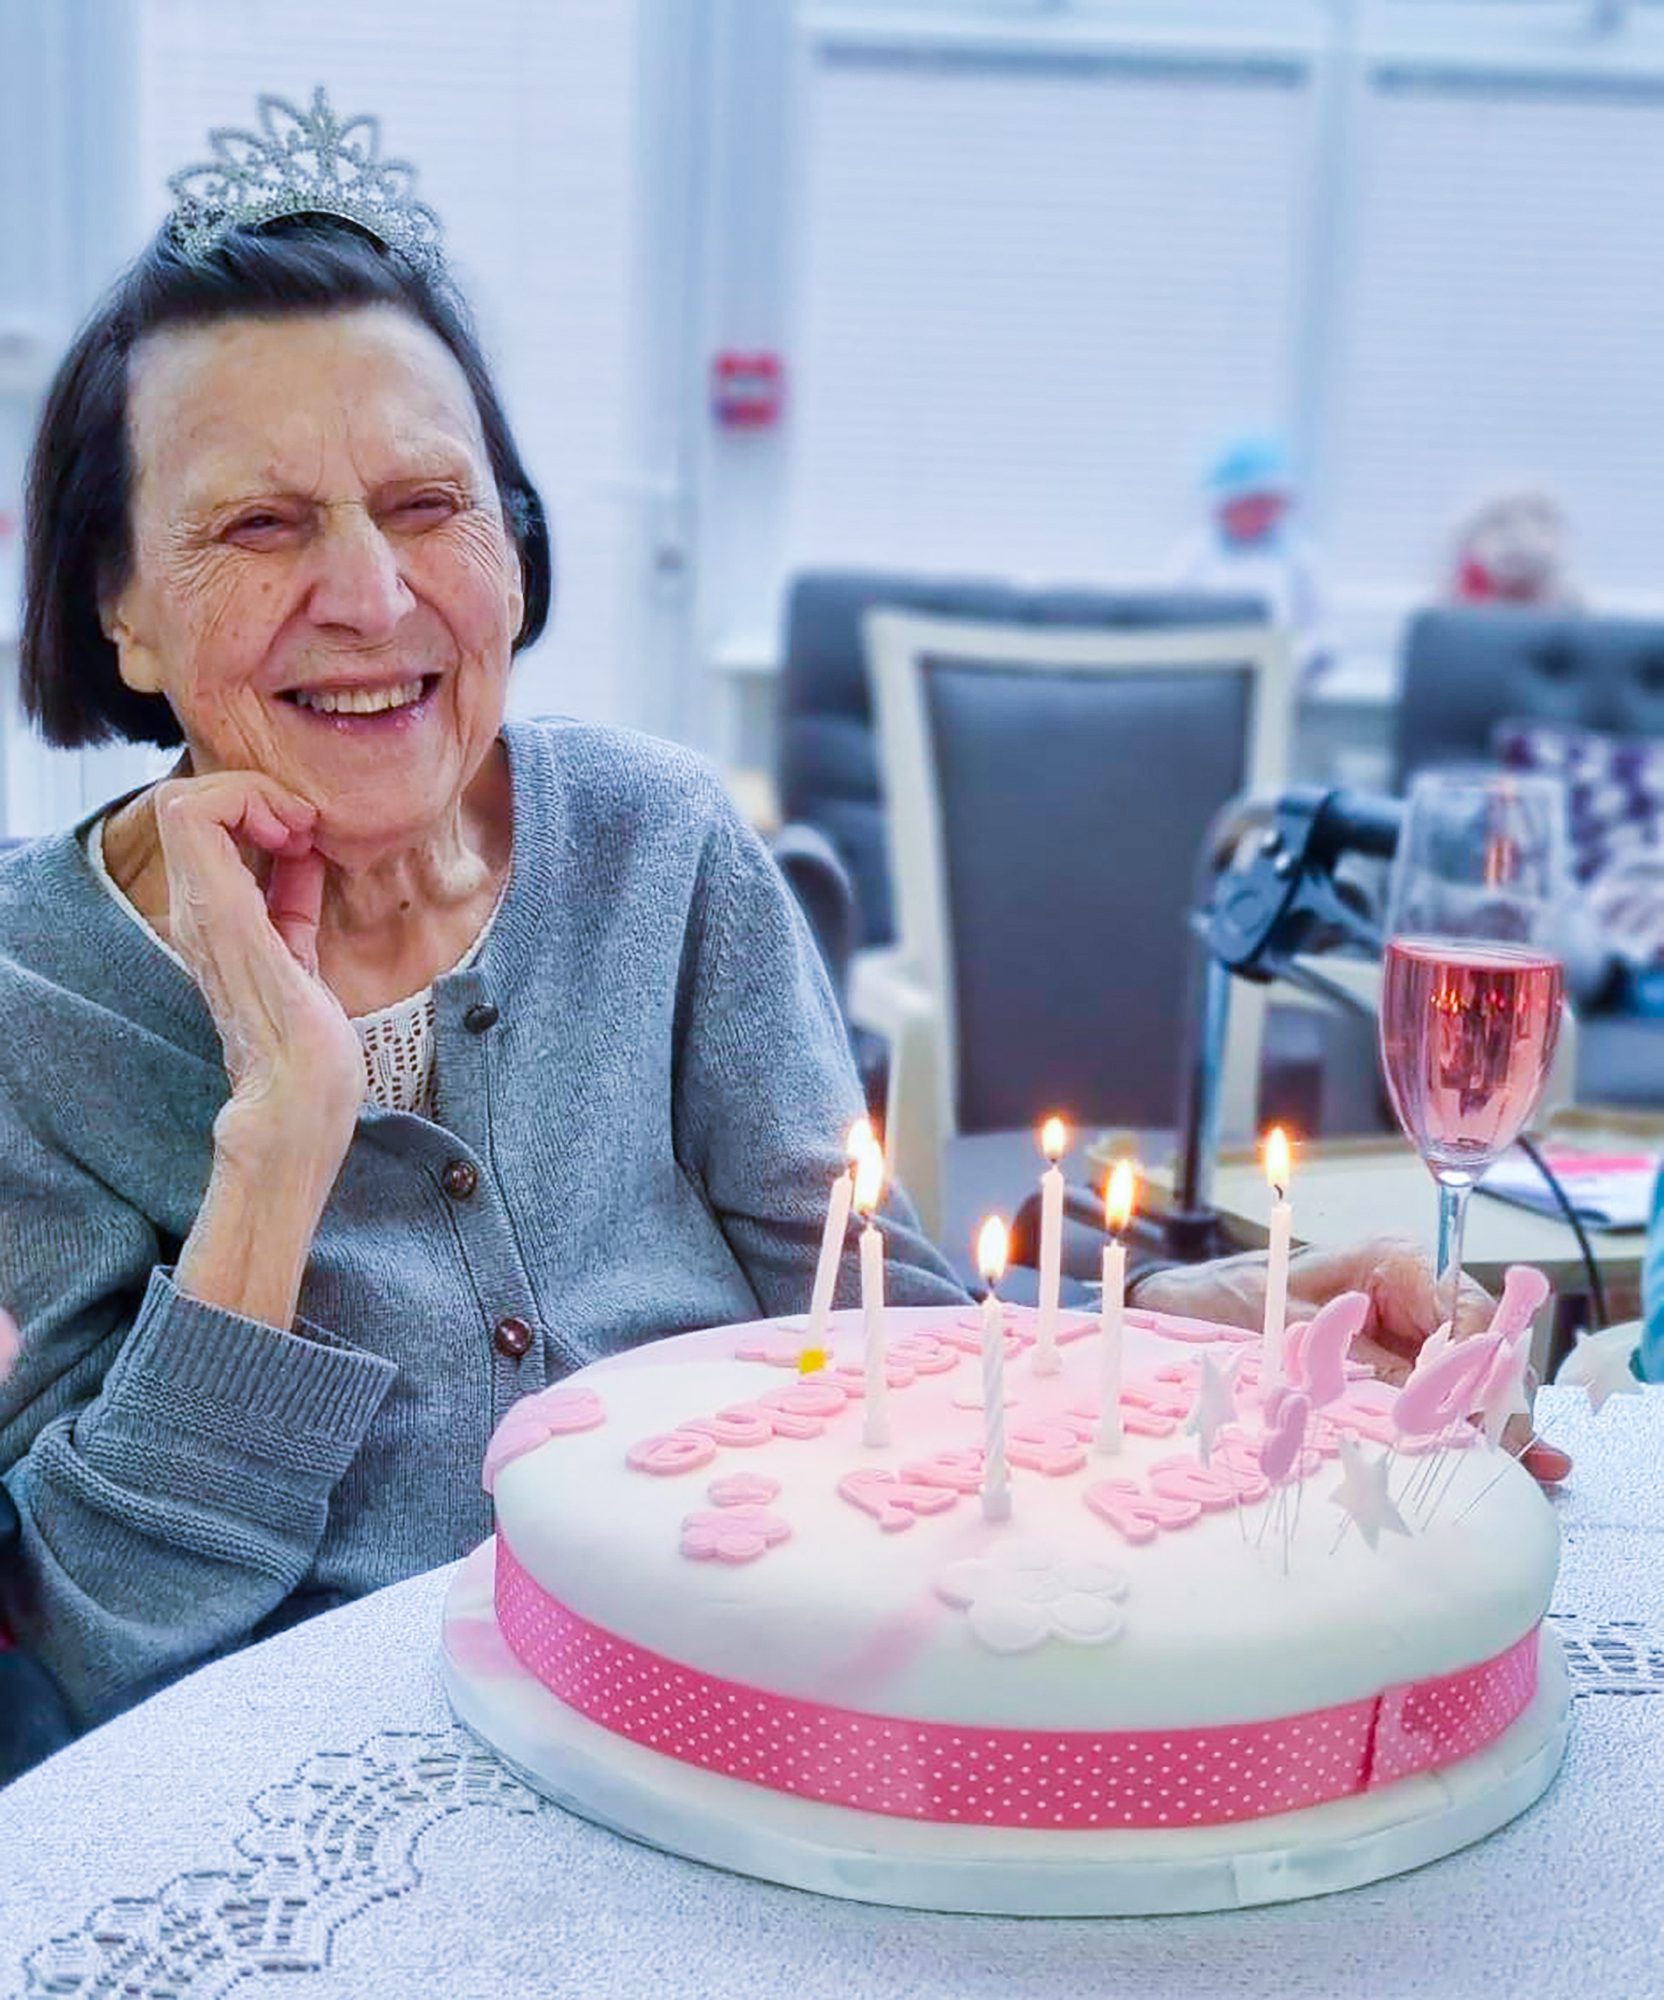 Blanche with her cake on her 102nd birthday